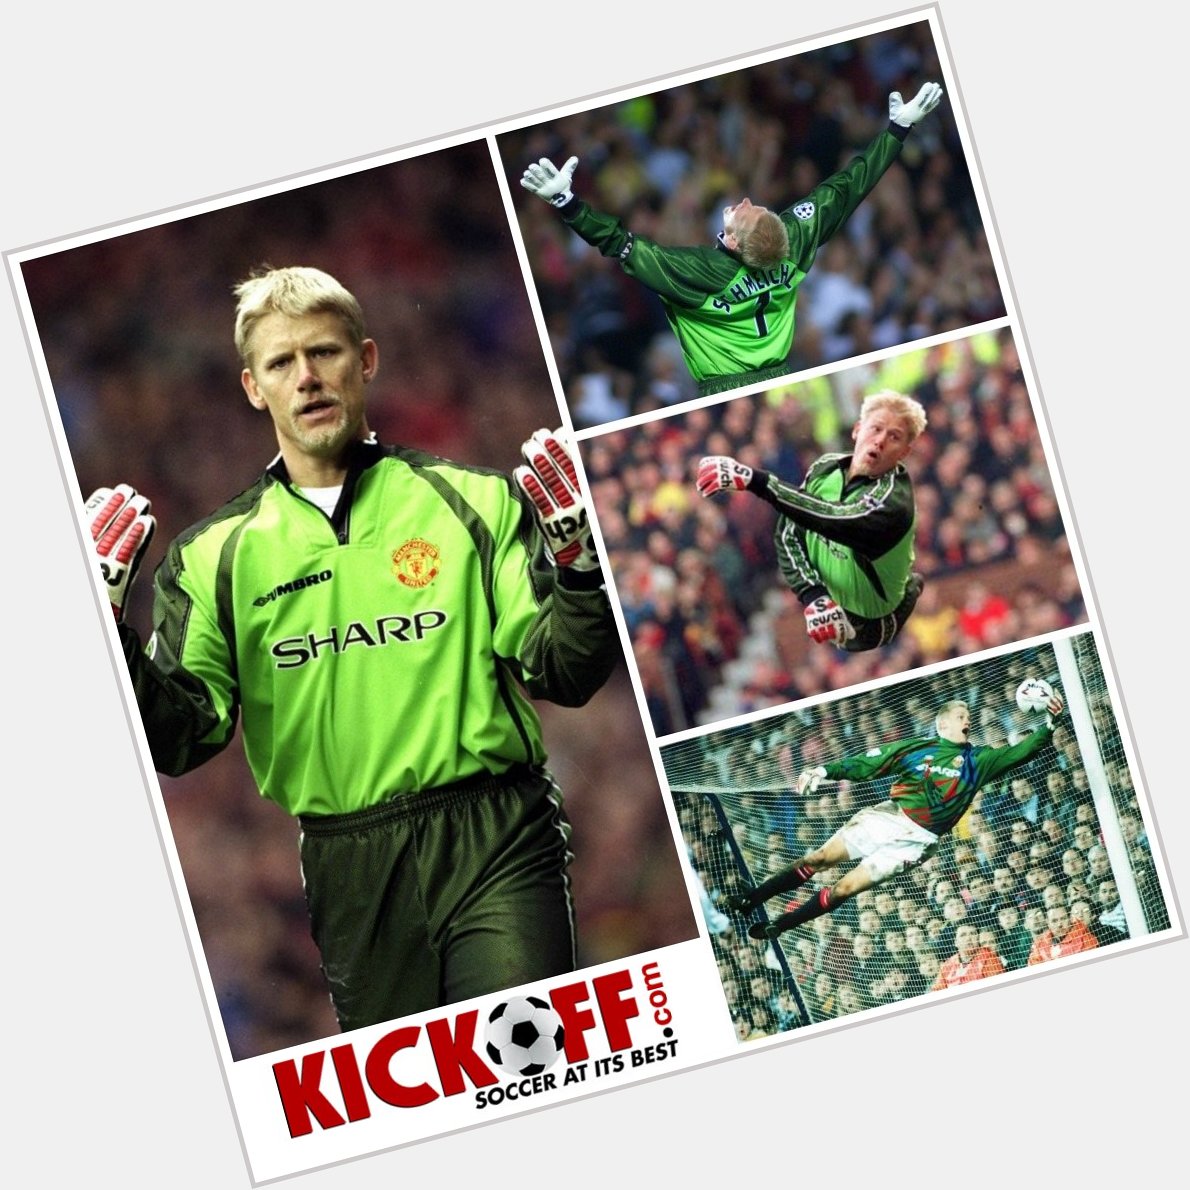 Happy Birthday Peter Schmeichel. And Happy birthday to you reader if it\s your birthday as well. 